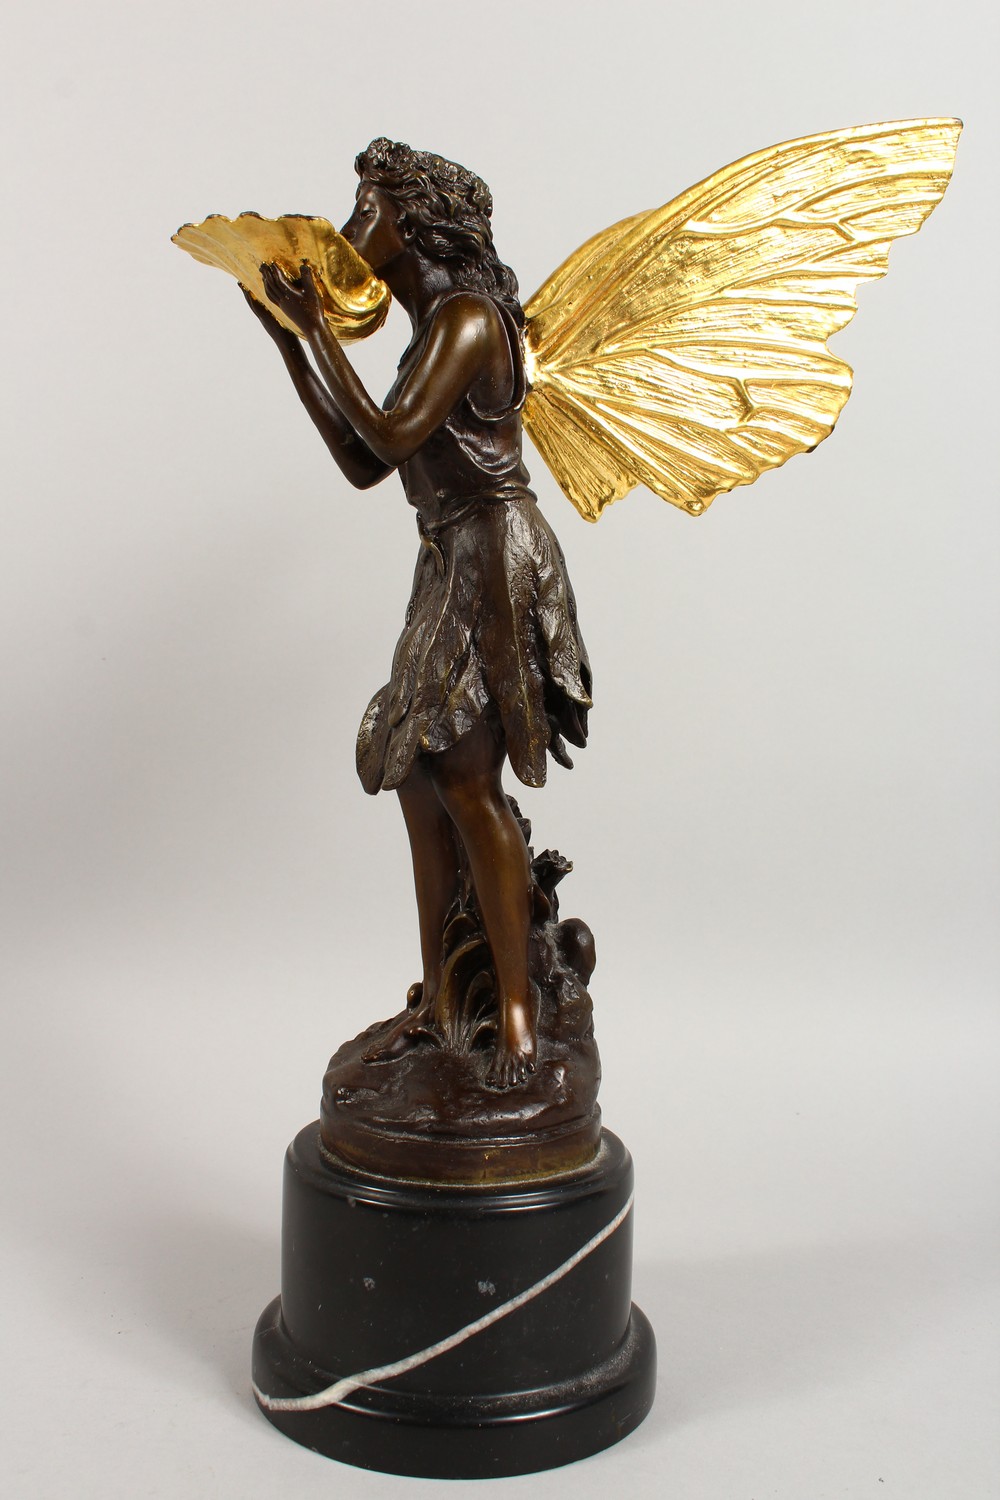 A BRONZE FIGURE OF A FAIRY, 20TH CENTURY, standing holding a shell in her hands, on a marble base. - Image 5 of 9